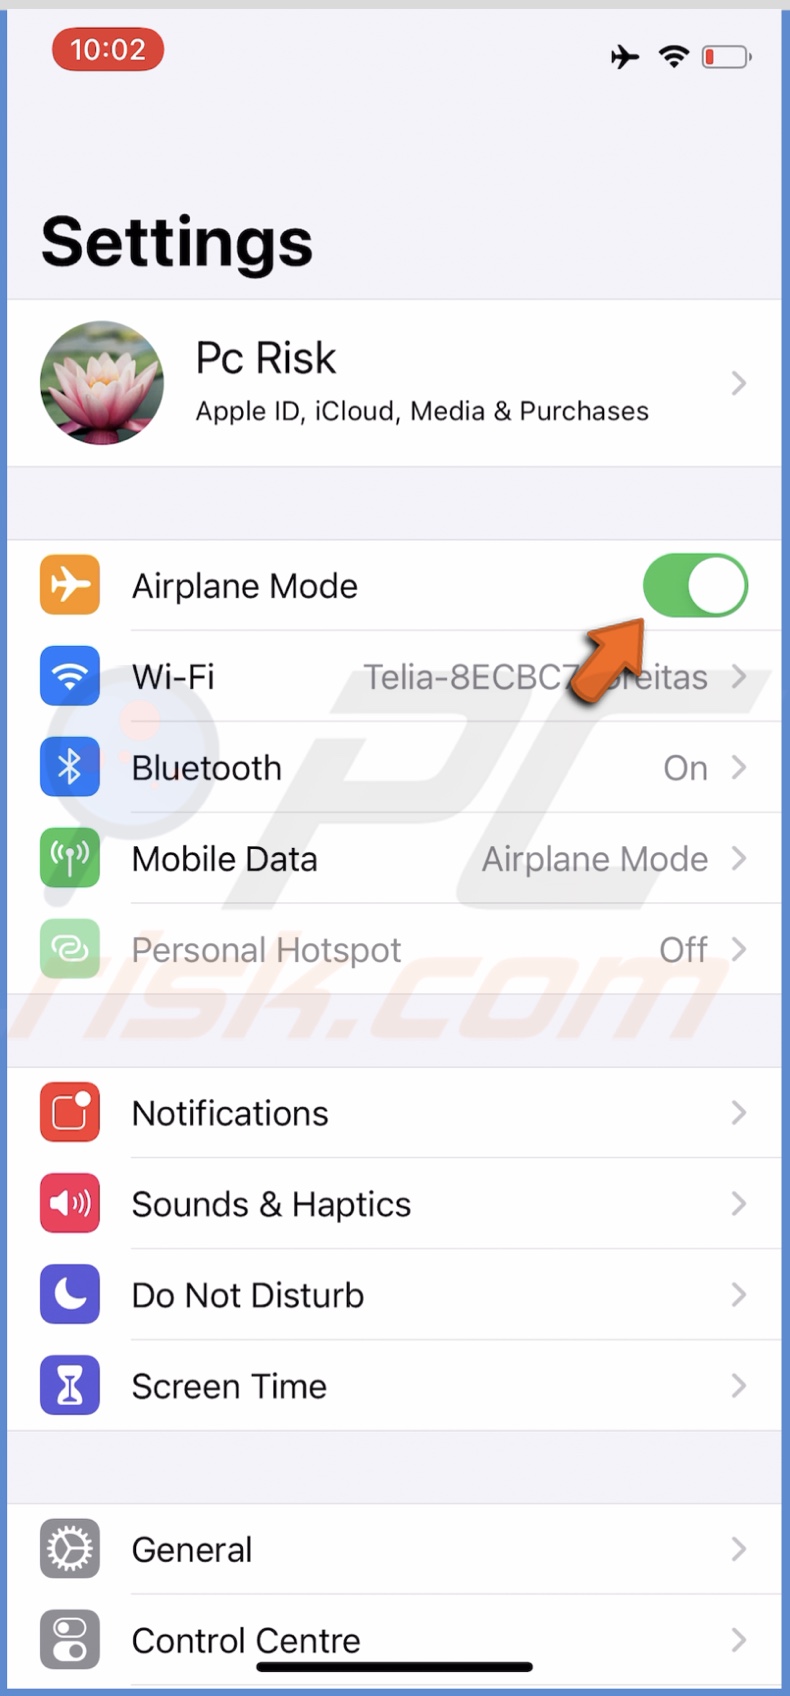 Enable the Airplane Mode